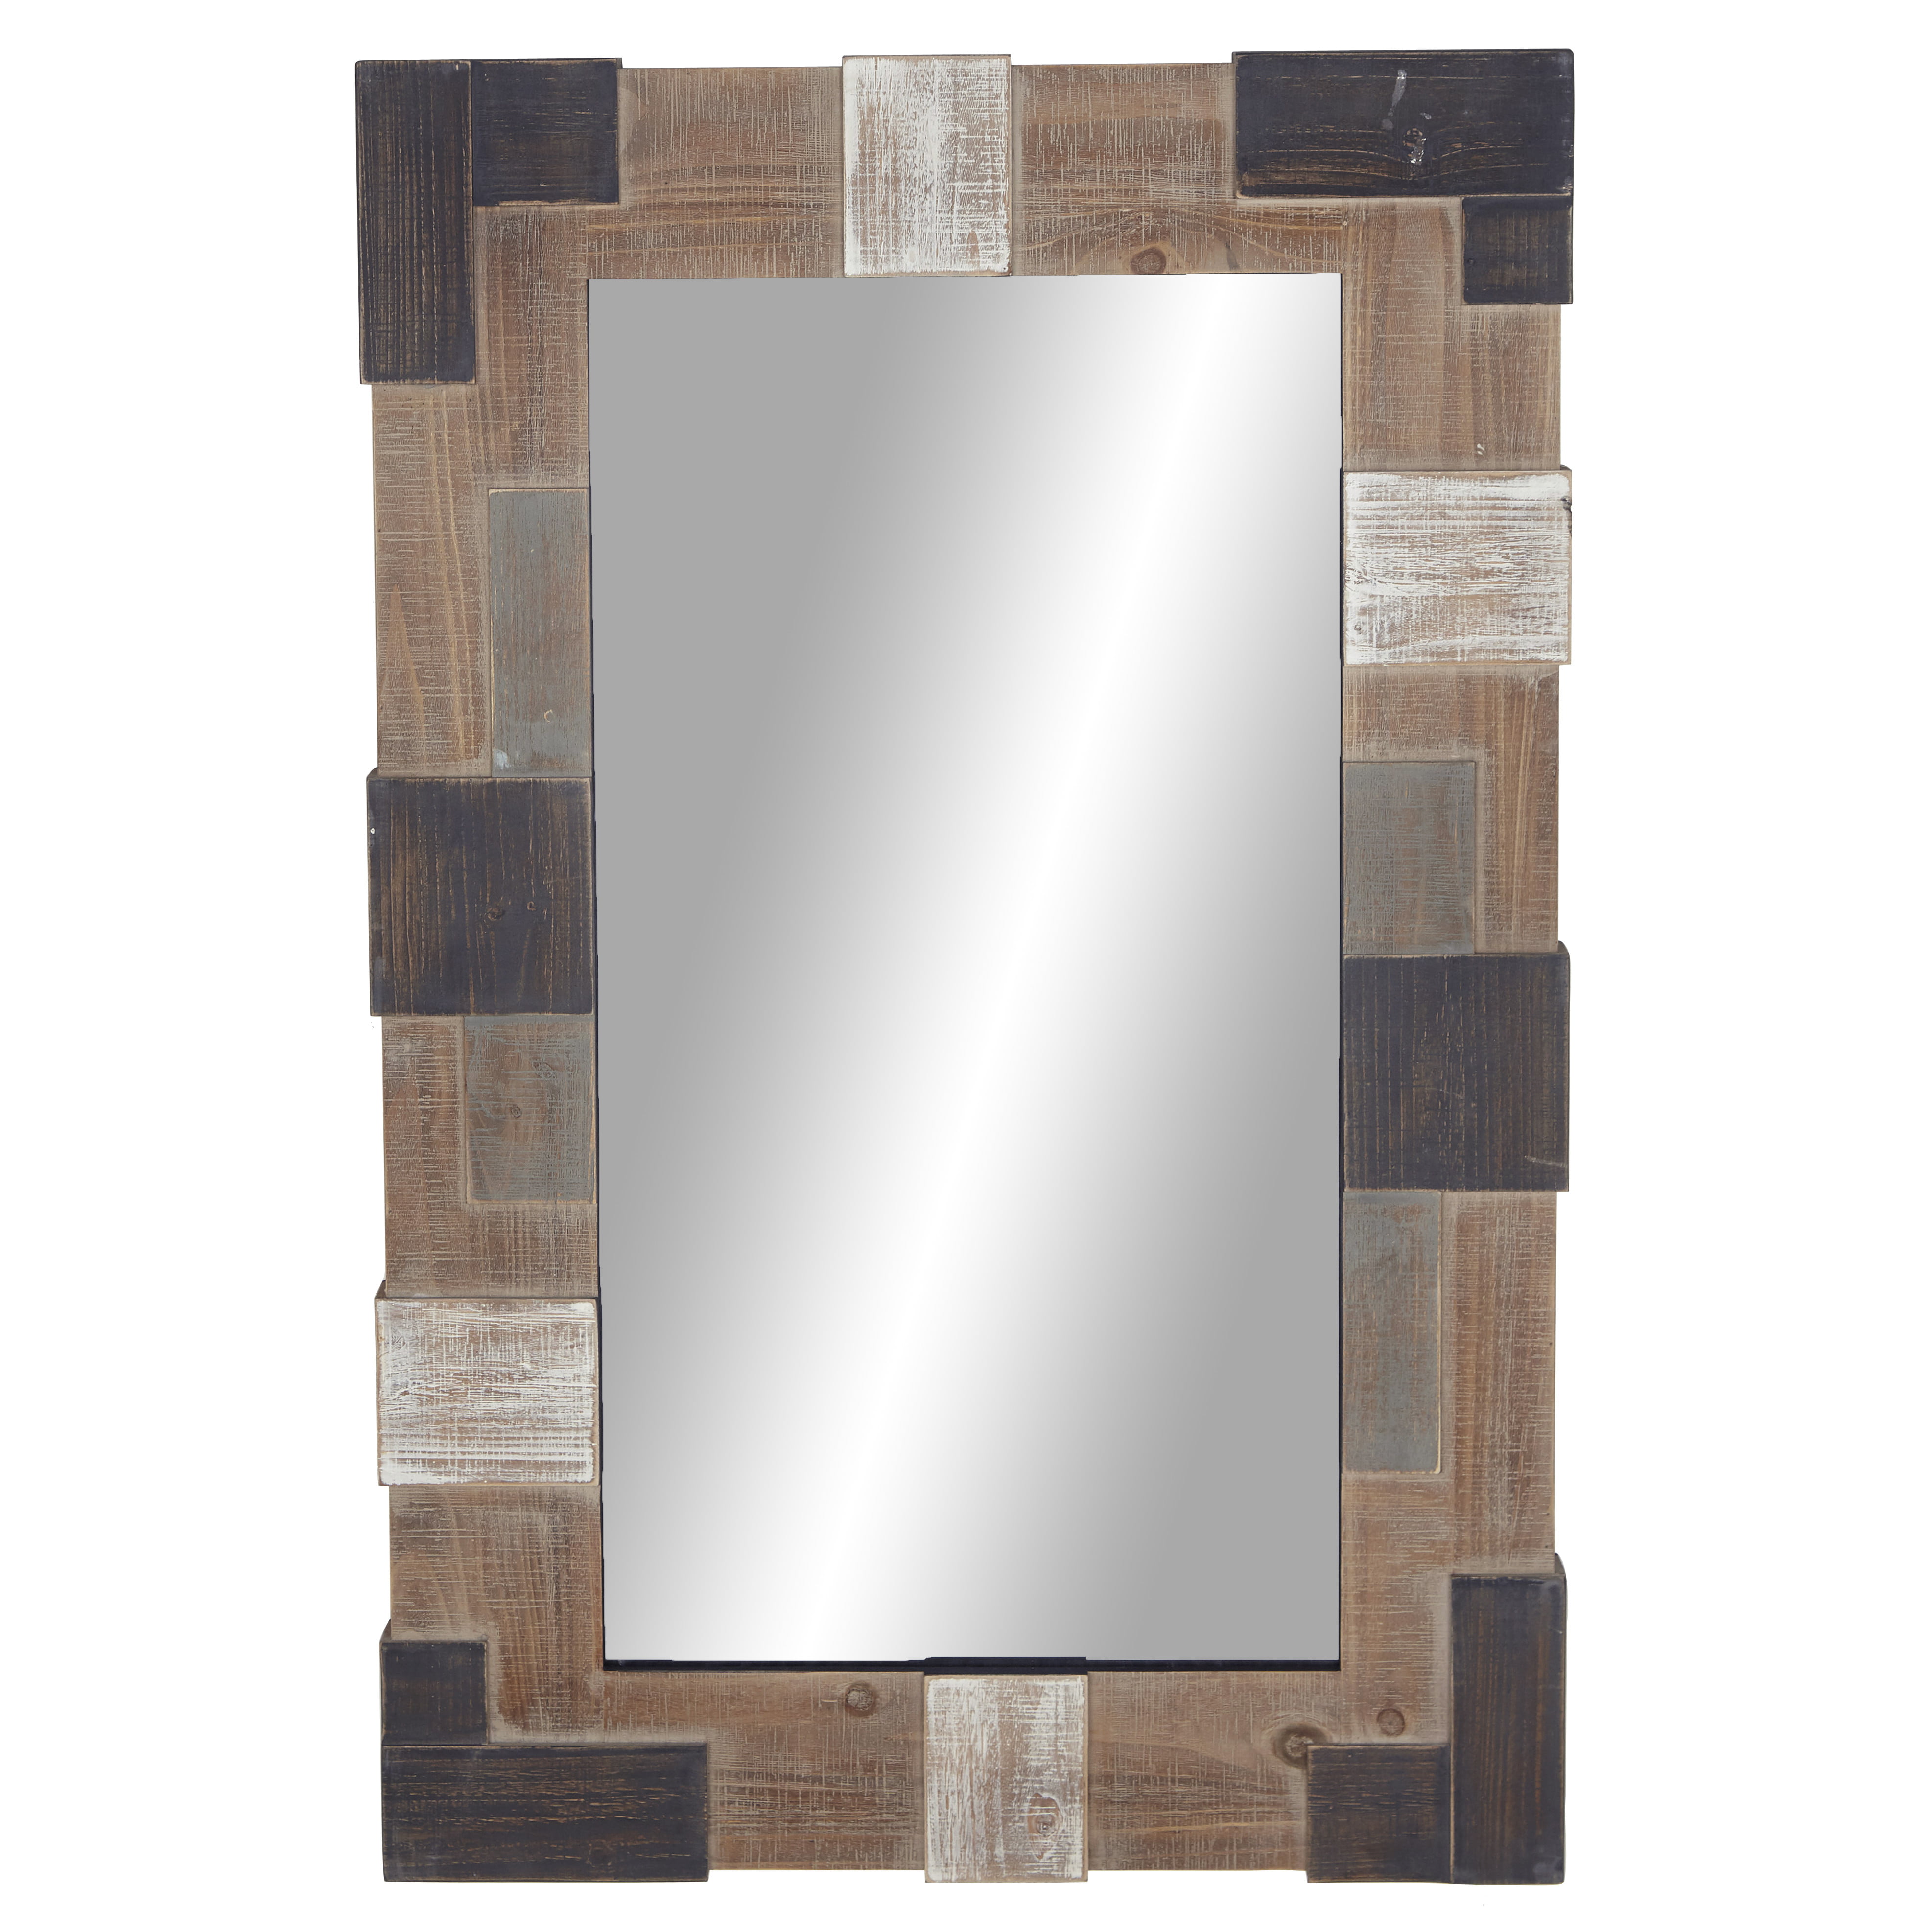 Heritage Wall Mirror Square Brown Walnut Large Decorative Accent Hanging 24 inch